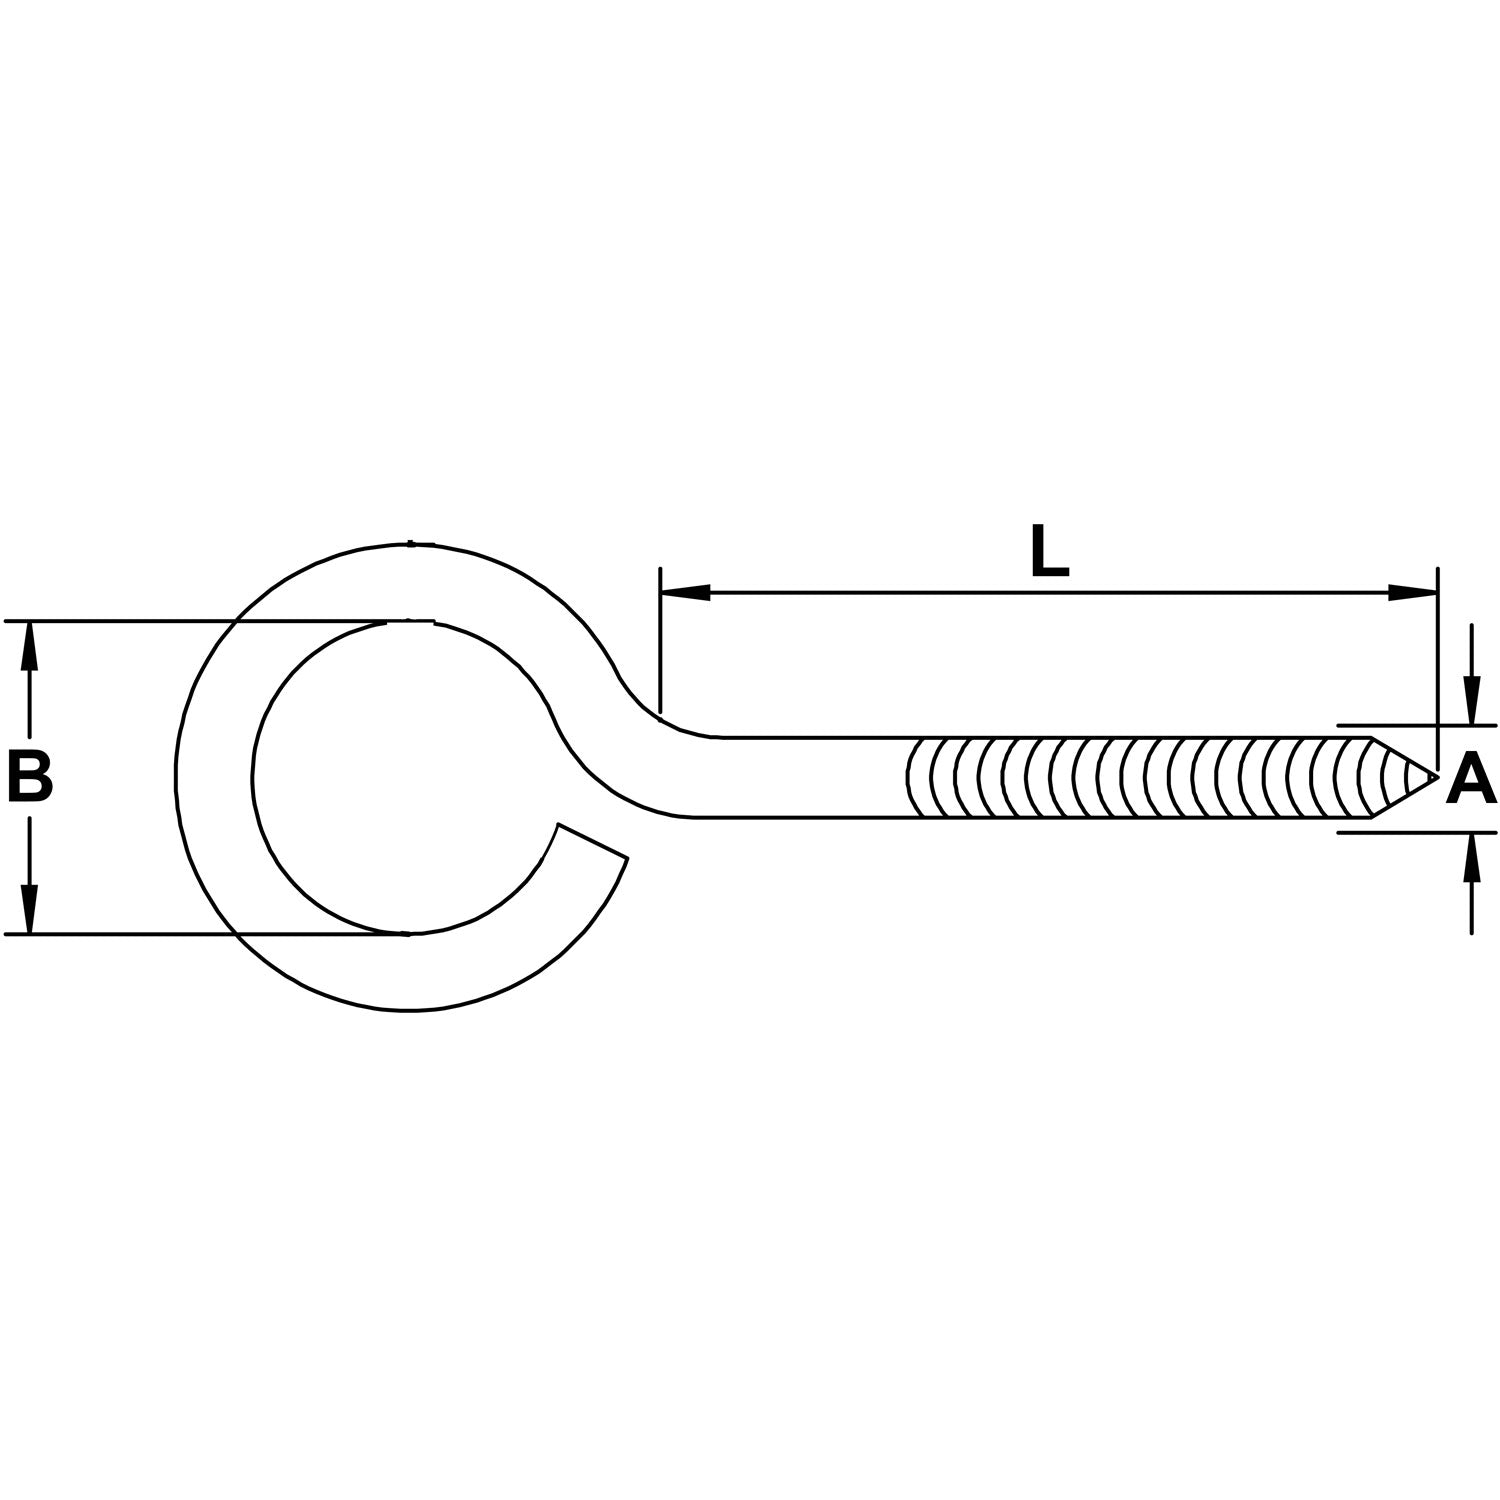 three-sixteenths-inch-x-one-inch-stainless-lag-eye-bolt-specification-diagram